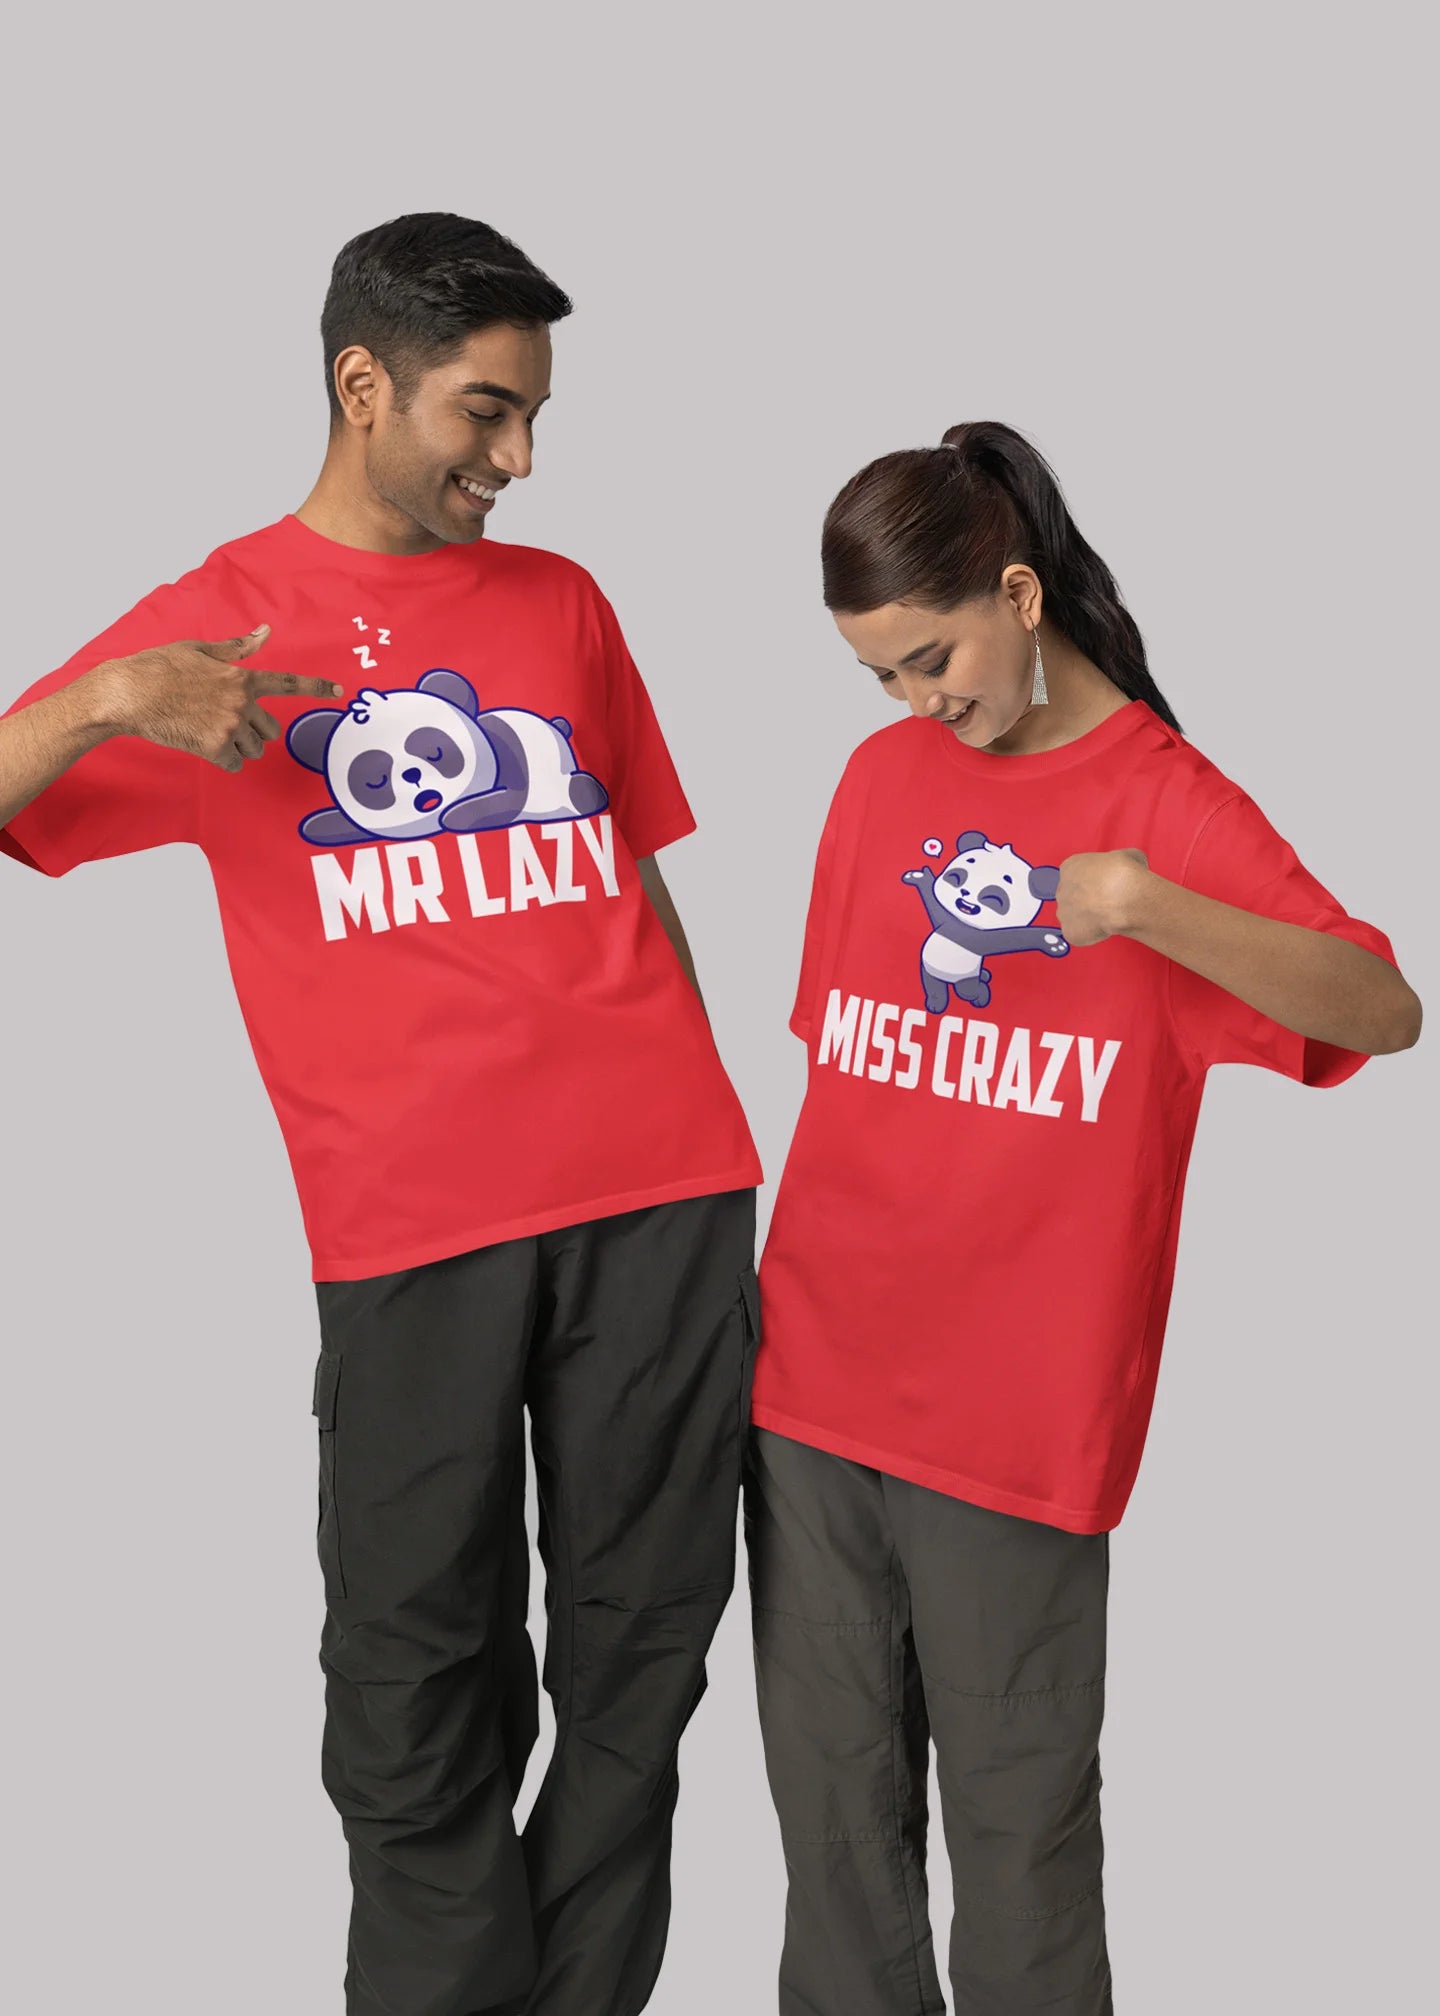 Mr Lazy And Miss Crazy Printed Couple T-shirt